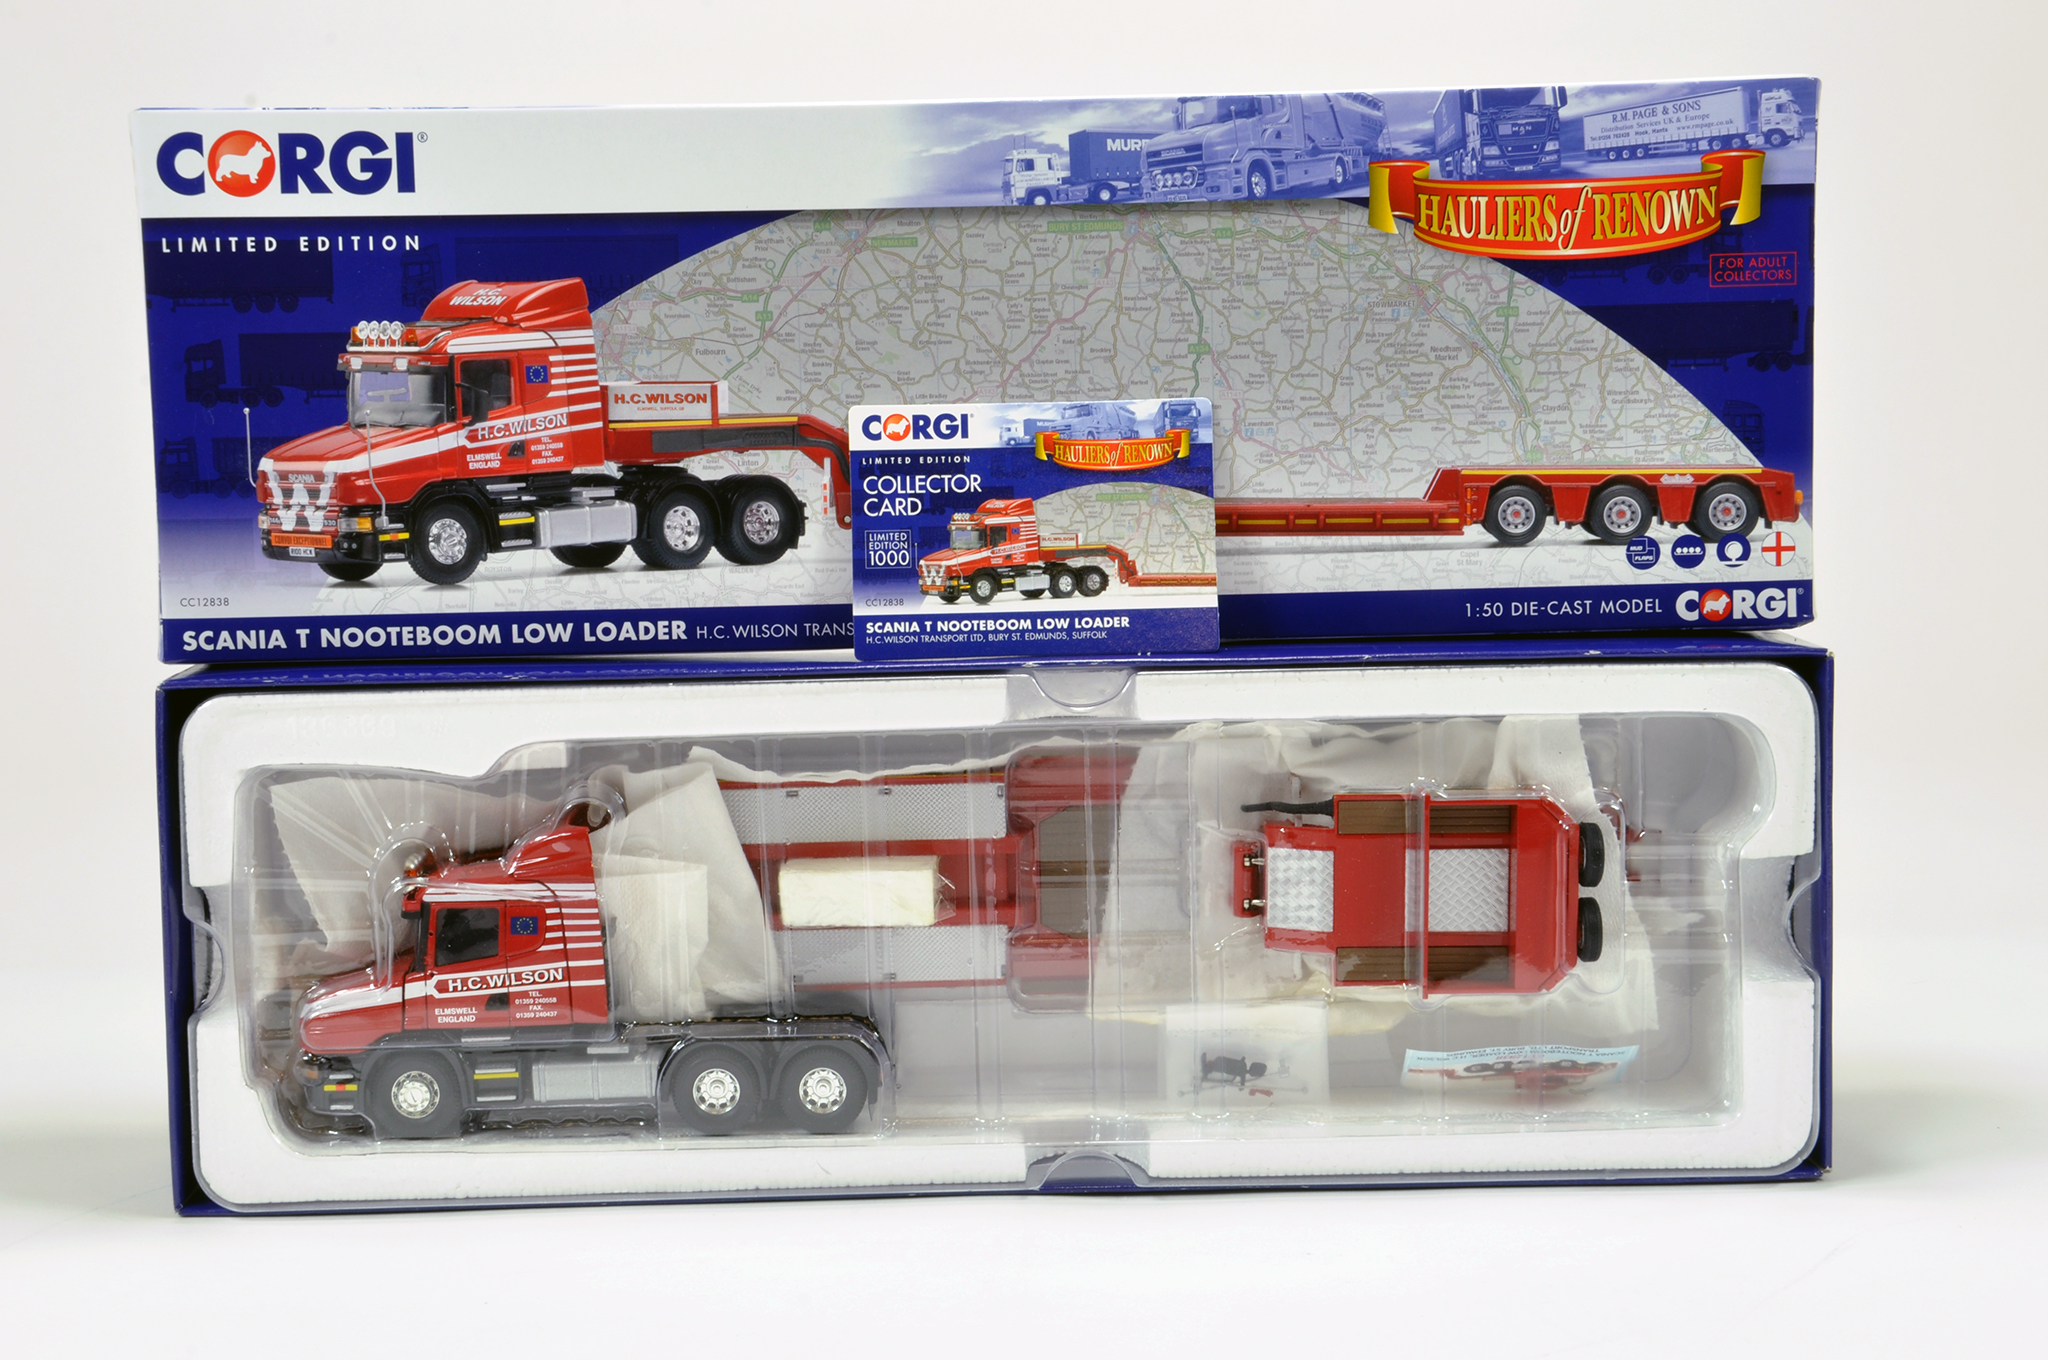 Corgi Diecast Truck Issue comprising No. CC12838 Scania T Nooteboom Low Loader in livery of HC